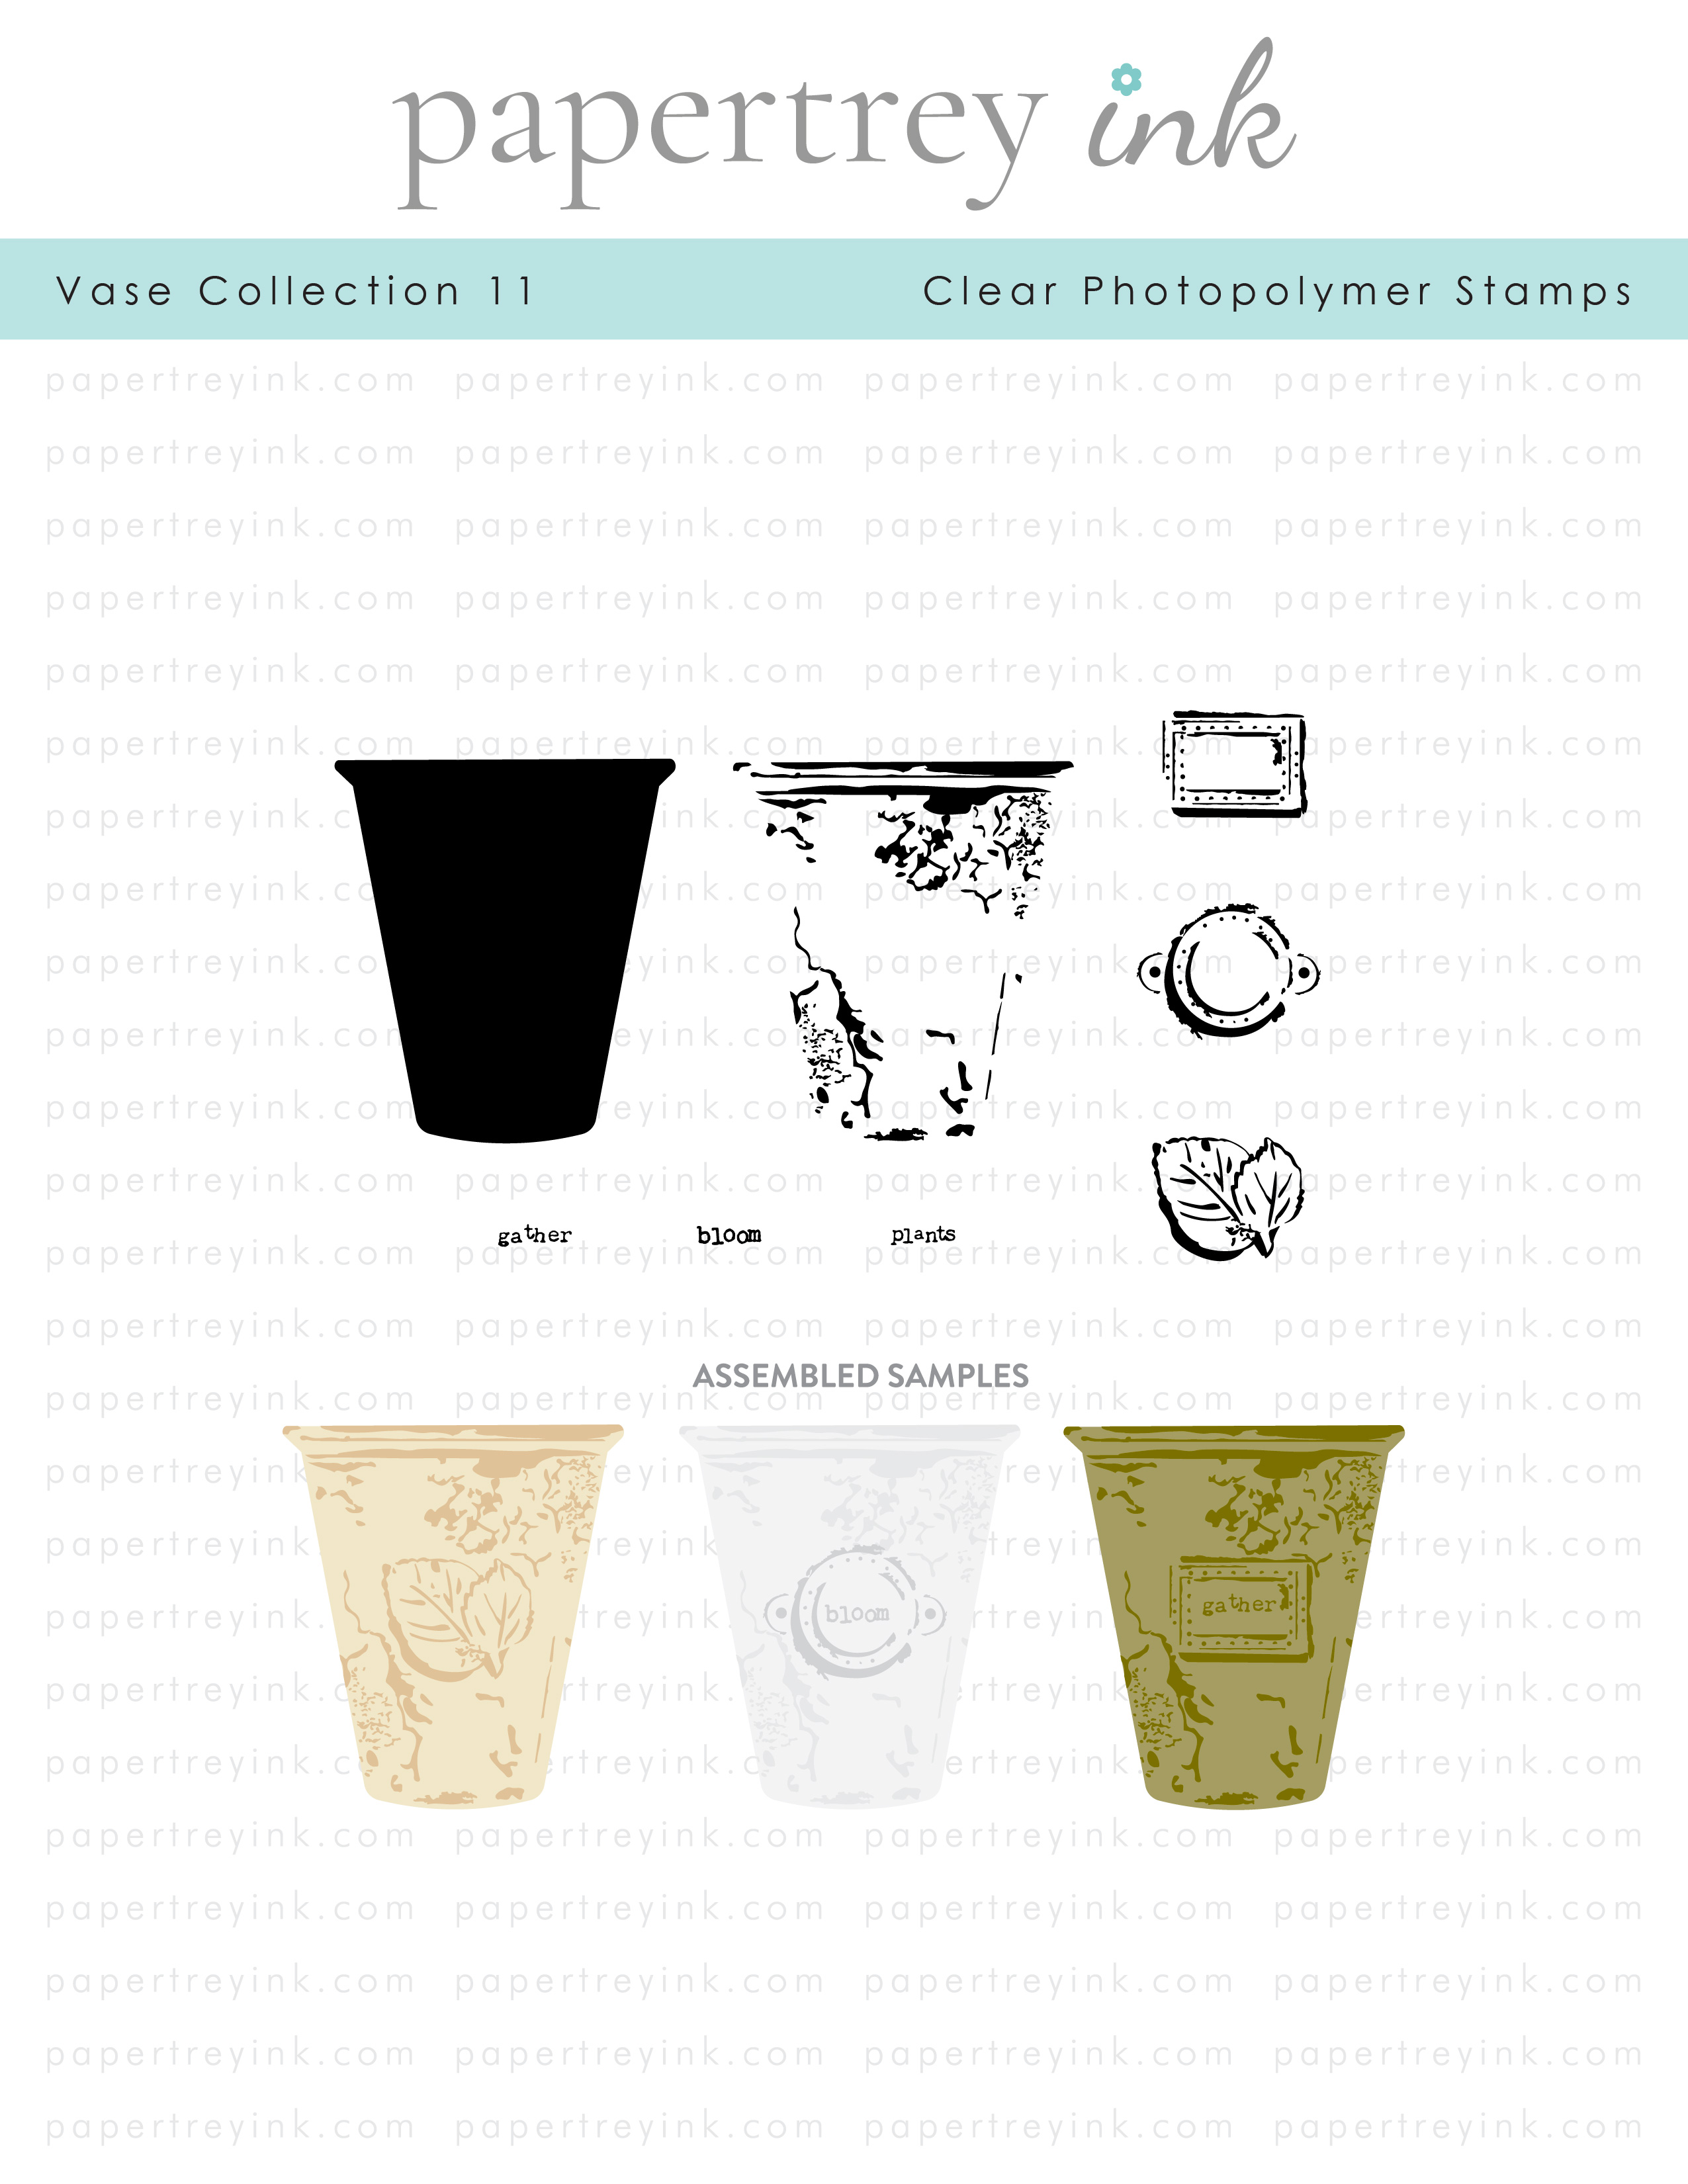 Vase Collection: Papertrey Ink